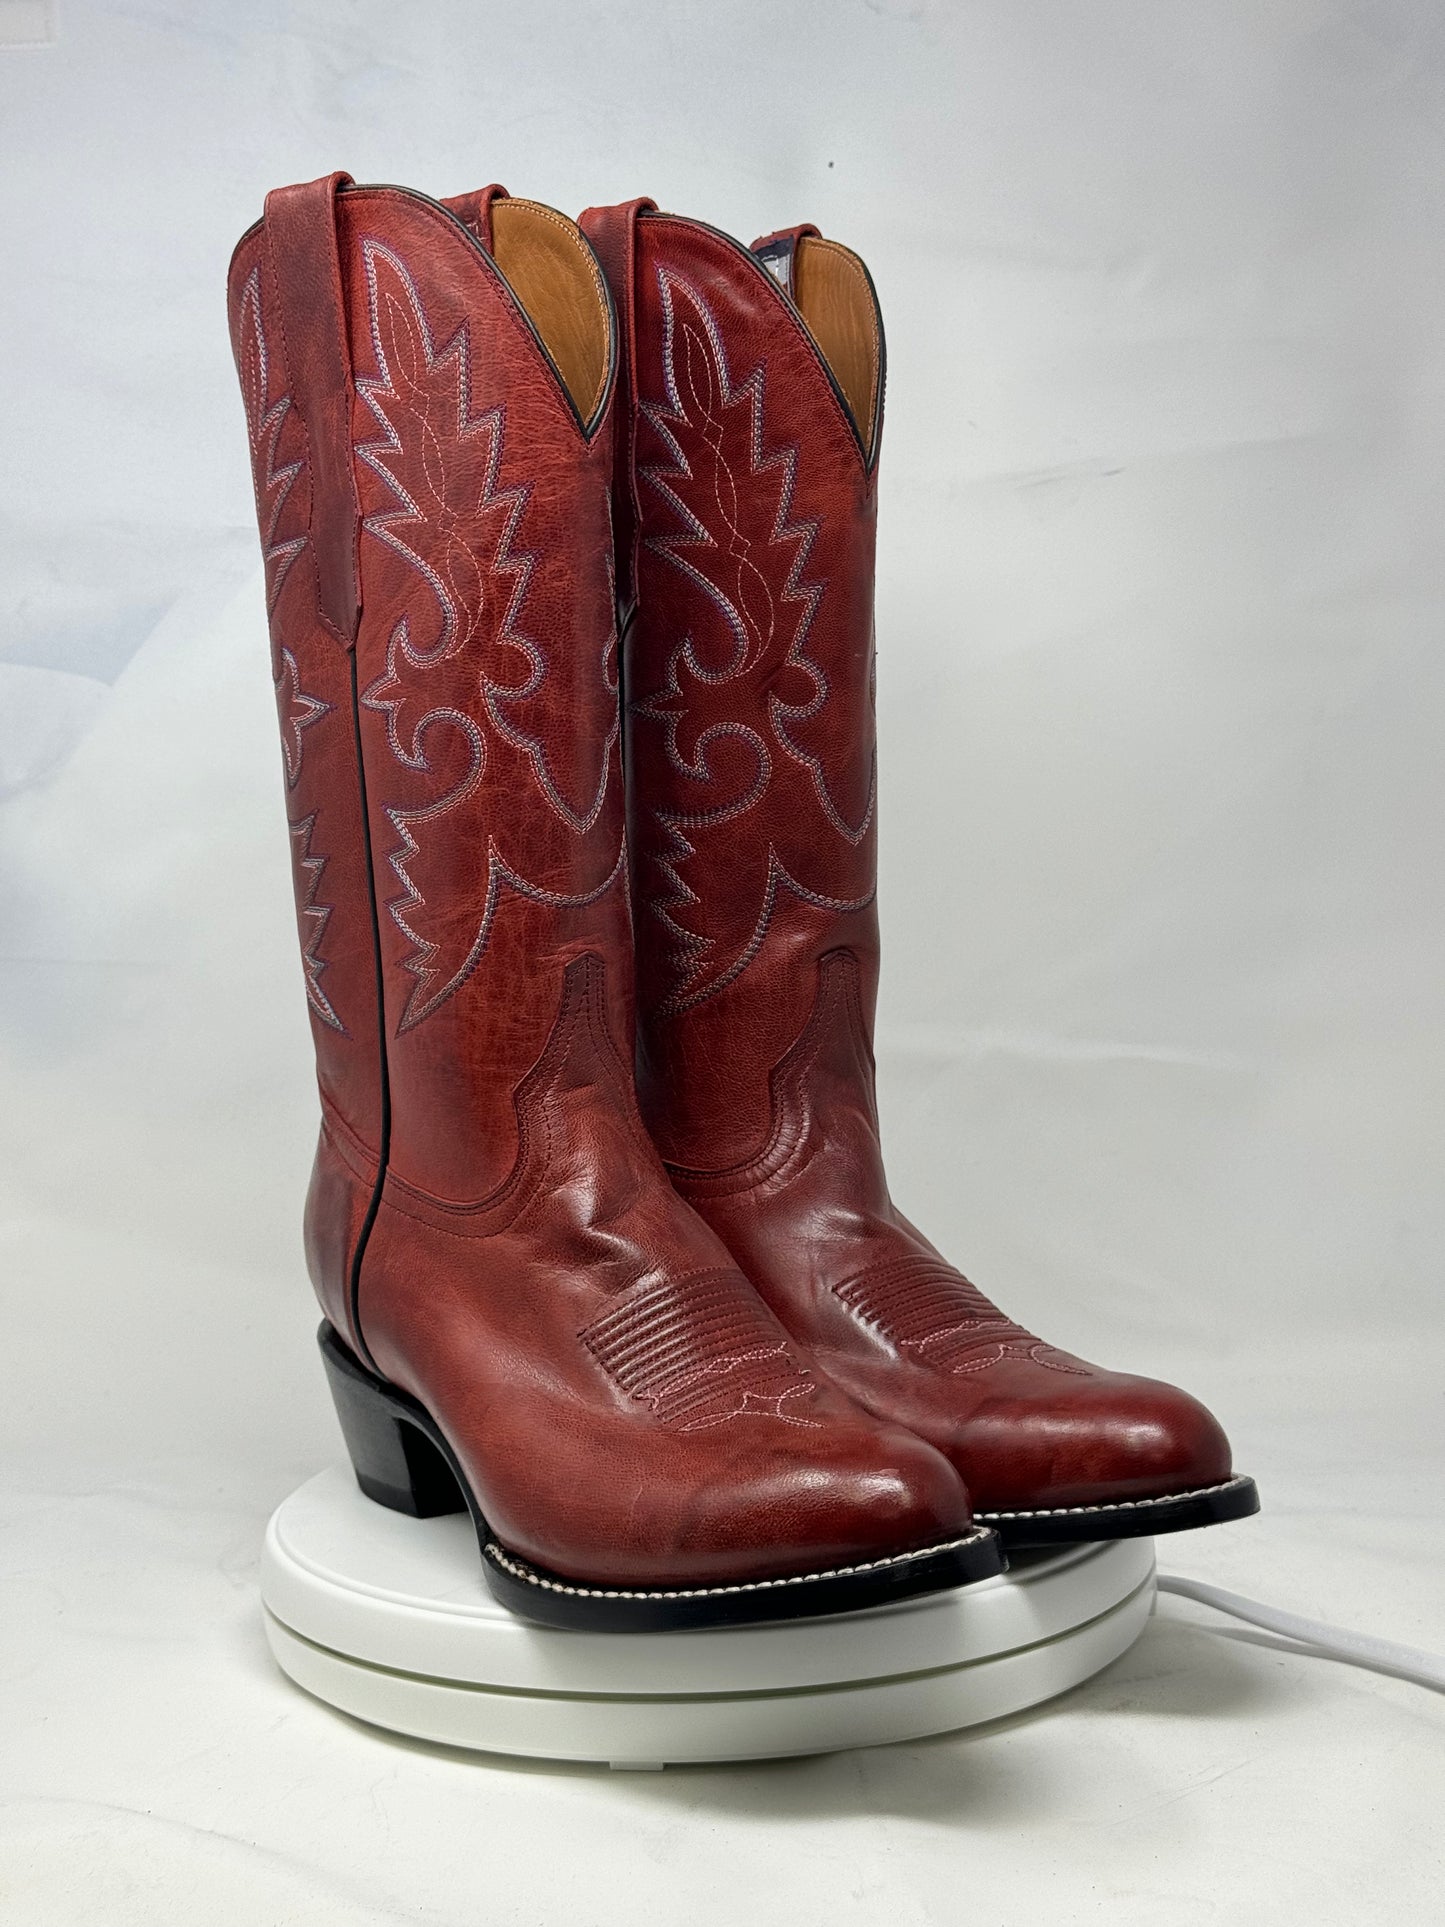 DJ1033 | Don Juan Boots Women's Mad dog Candy Apple Red Rw